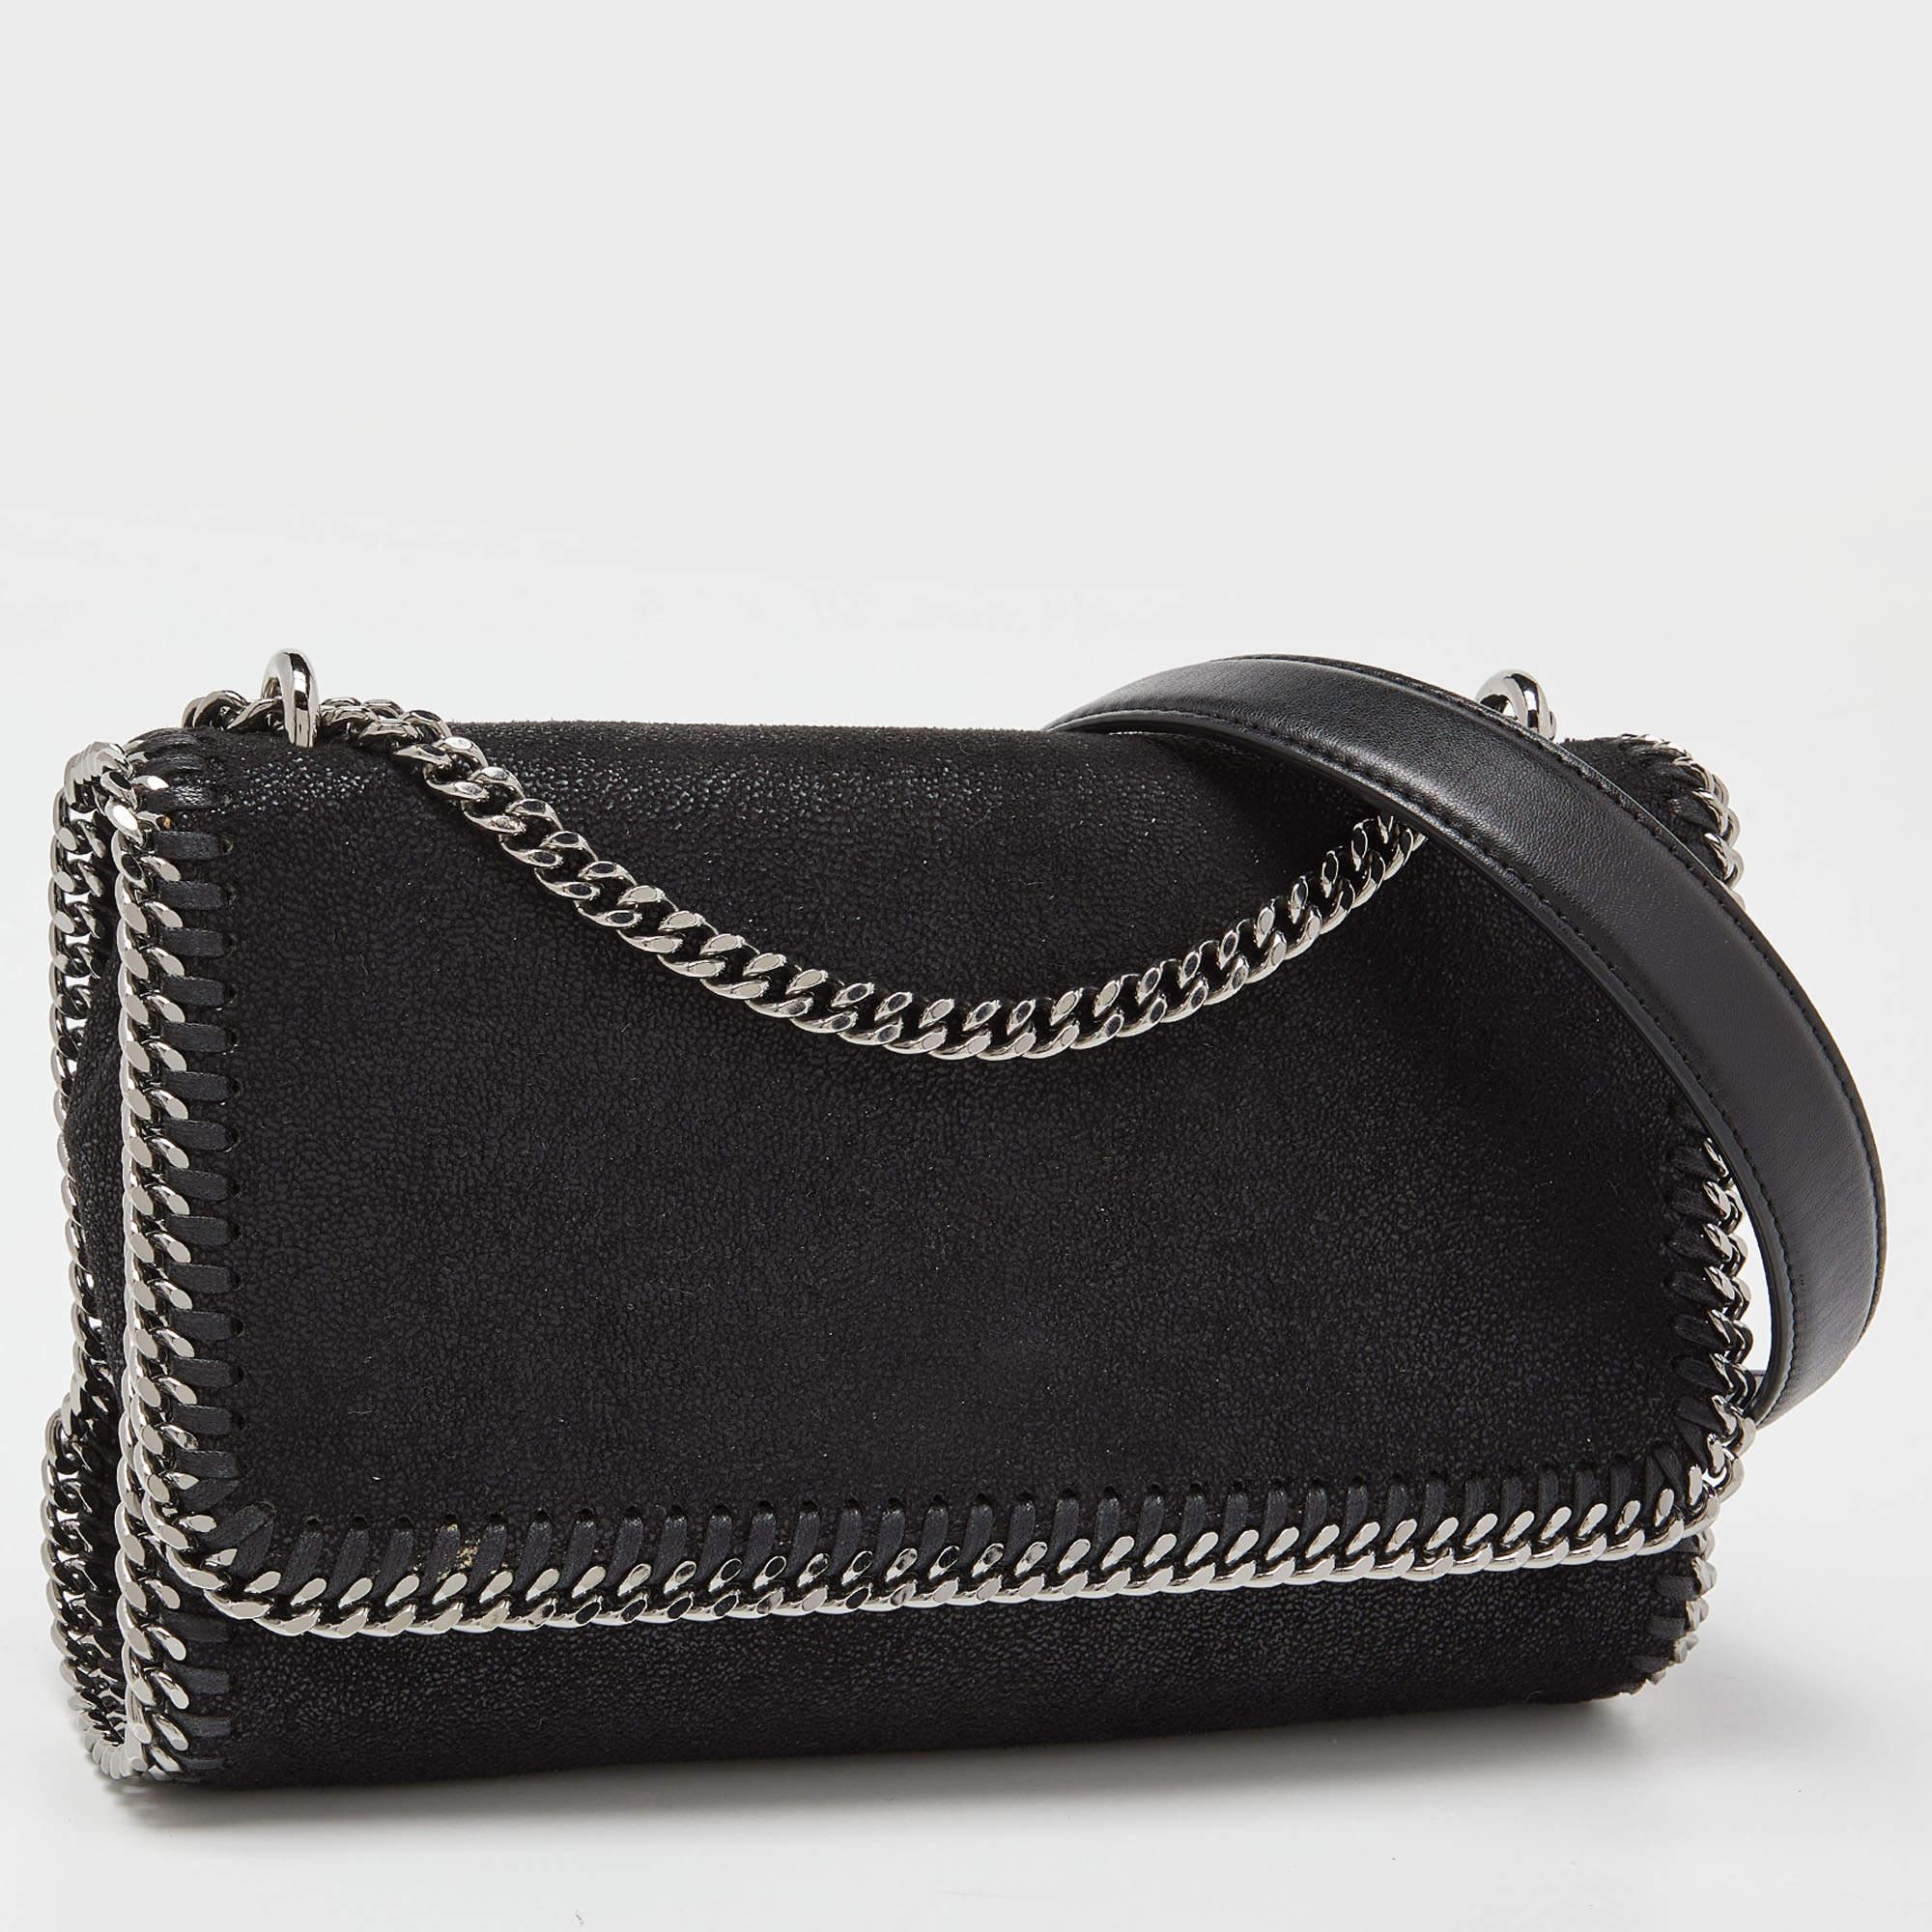 This Falabella shoulder bag from Stella McCartney will make the dream of countless women come true. Crafted from faux suede, it is durable and stylish. While the chain detailing elevates its beauty, the nylon-lined interior will dutifully hold all